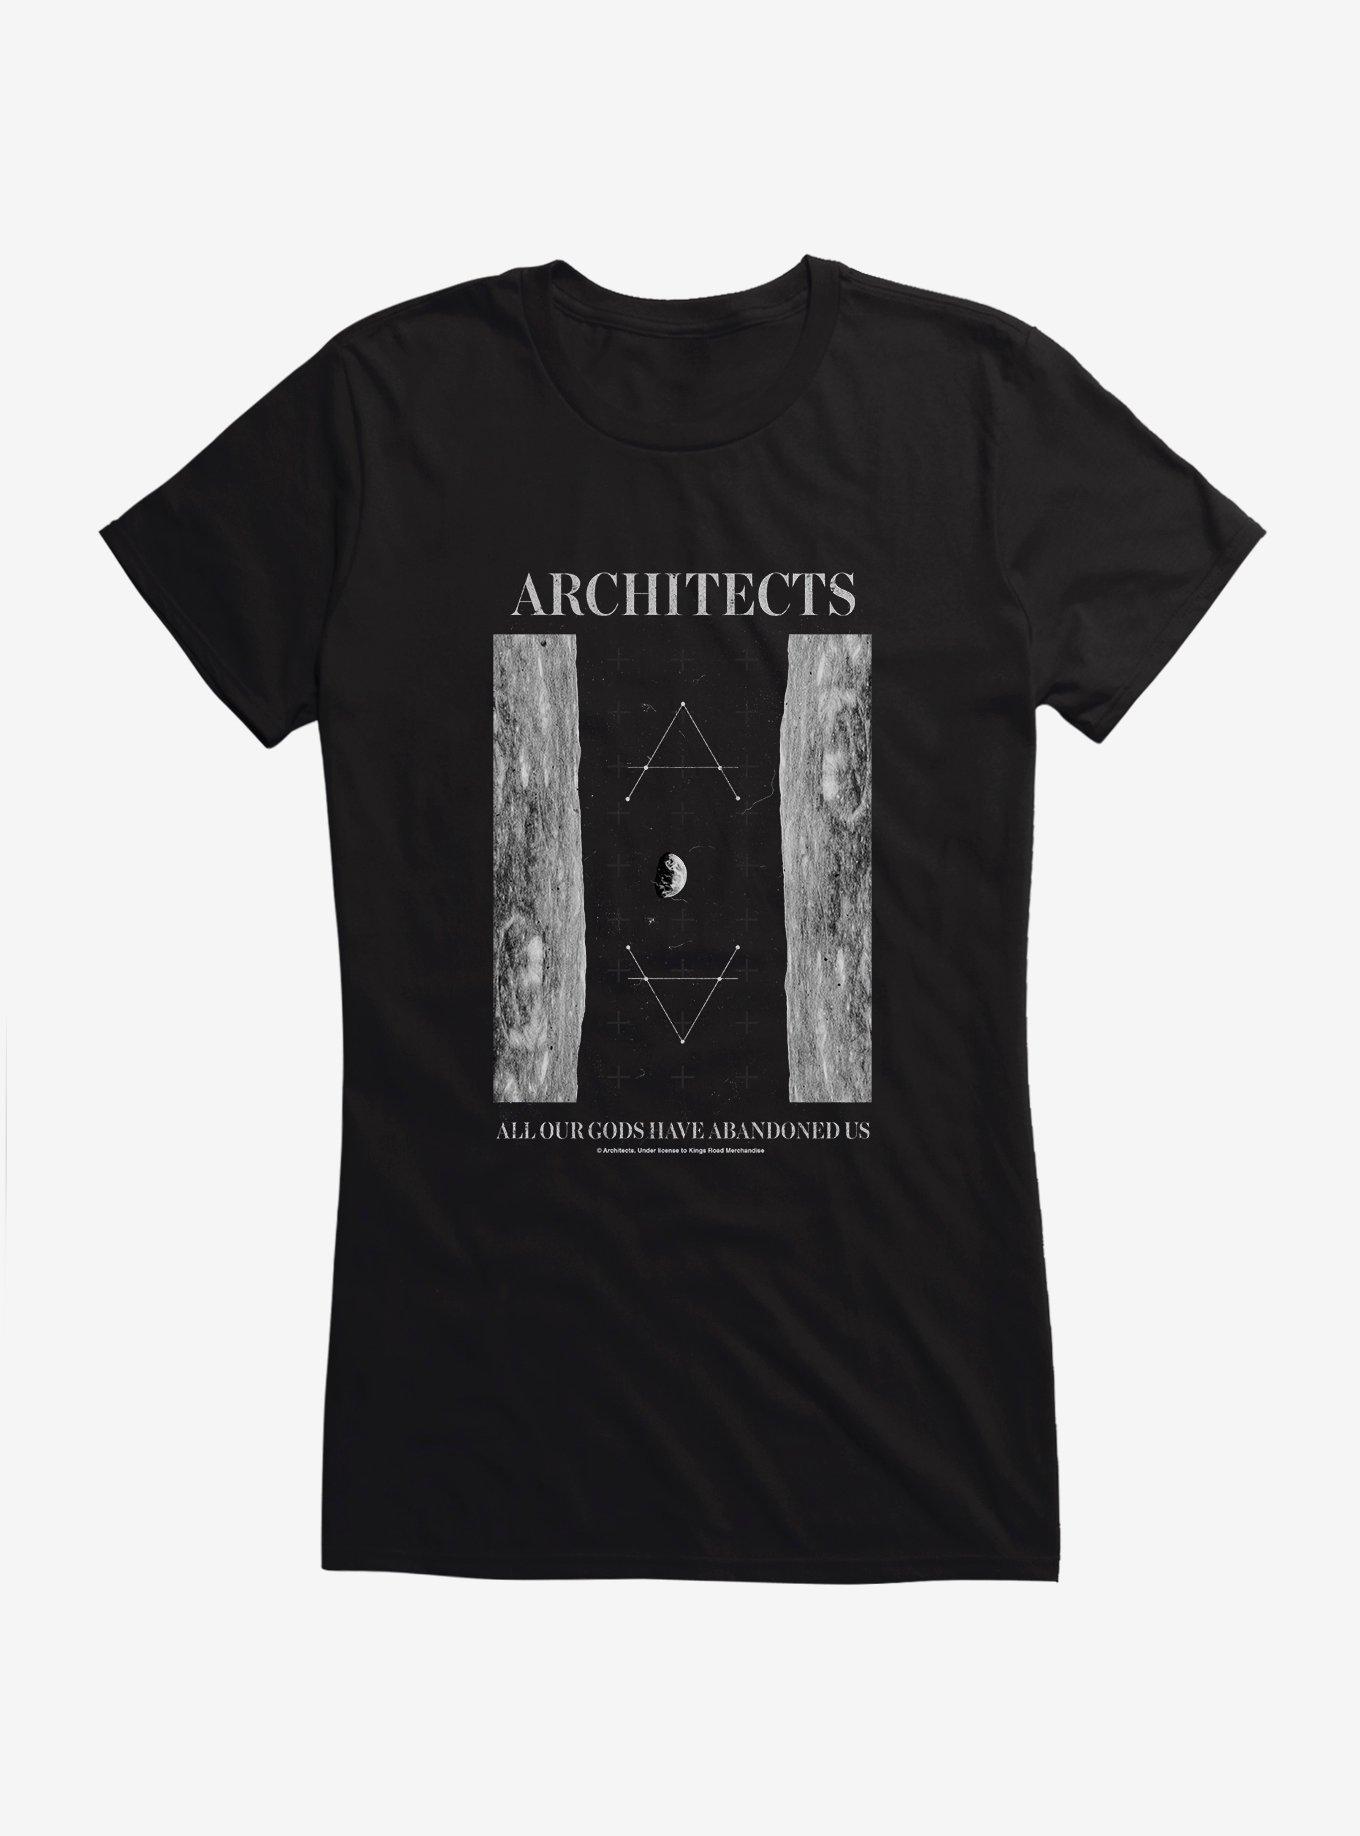 Architects All Our Gods Abandoned Us Girls T-Shirt, BLACK, hi-res